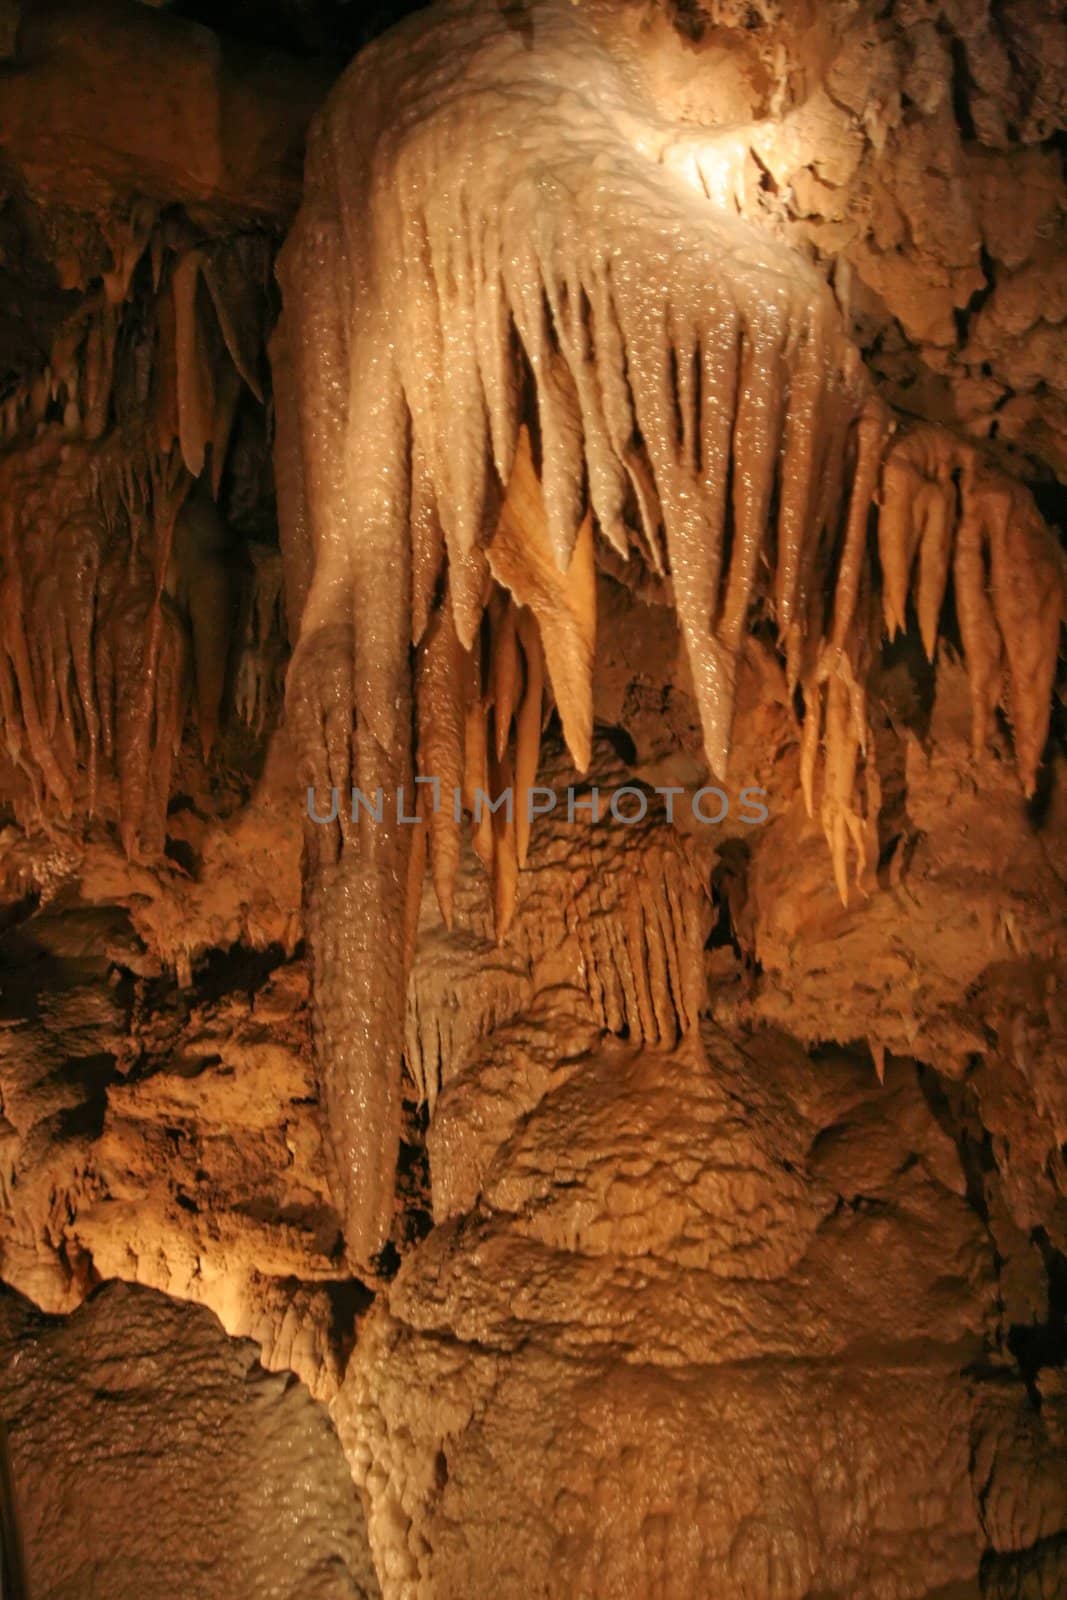 Crystal formations in Lake Shasta Caverns